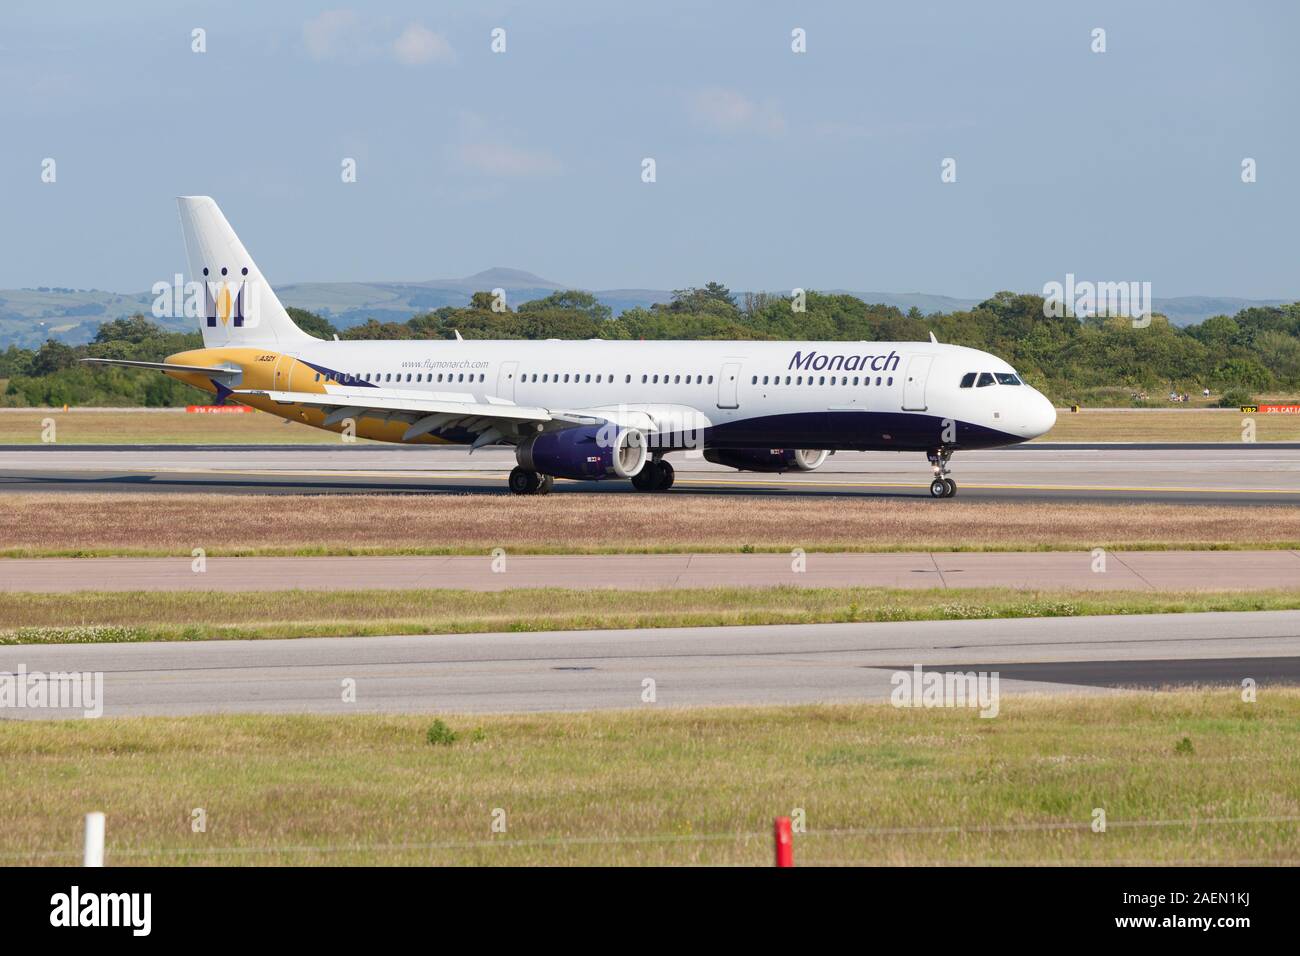 Monarch Airlines aircraft, England Stock Photo